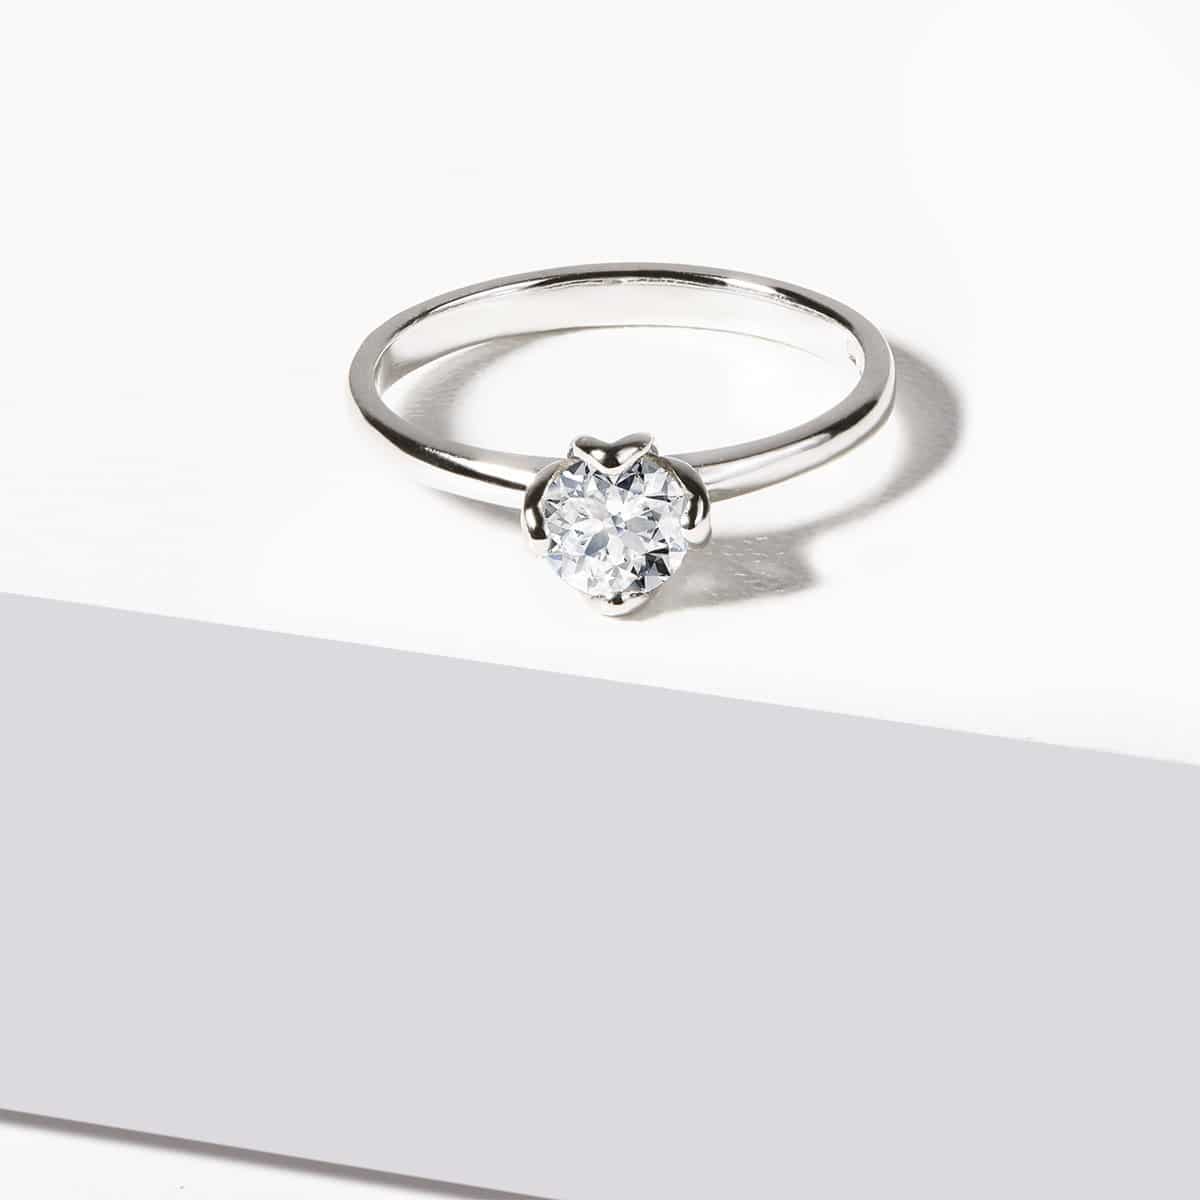 Five Engagement Ring Styles That Won’t Let You Down